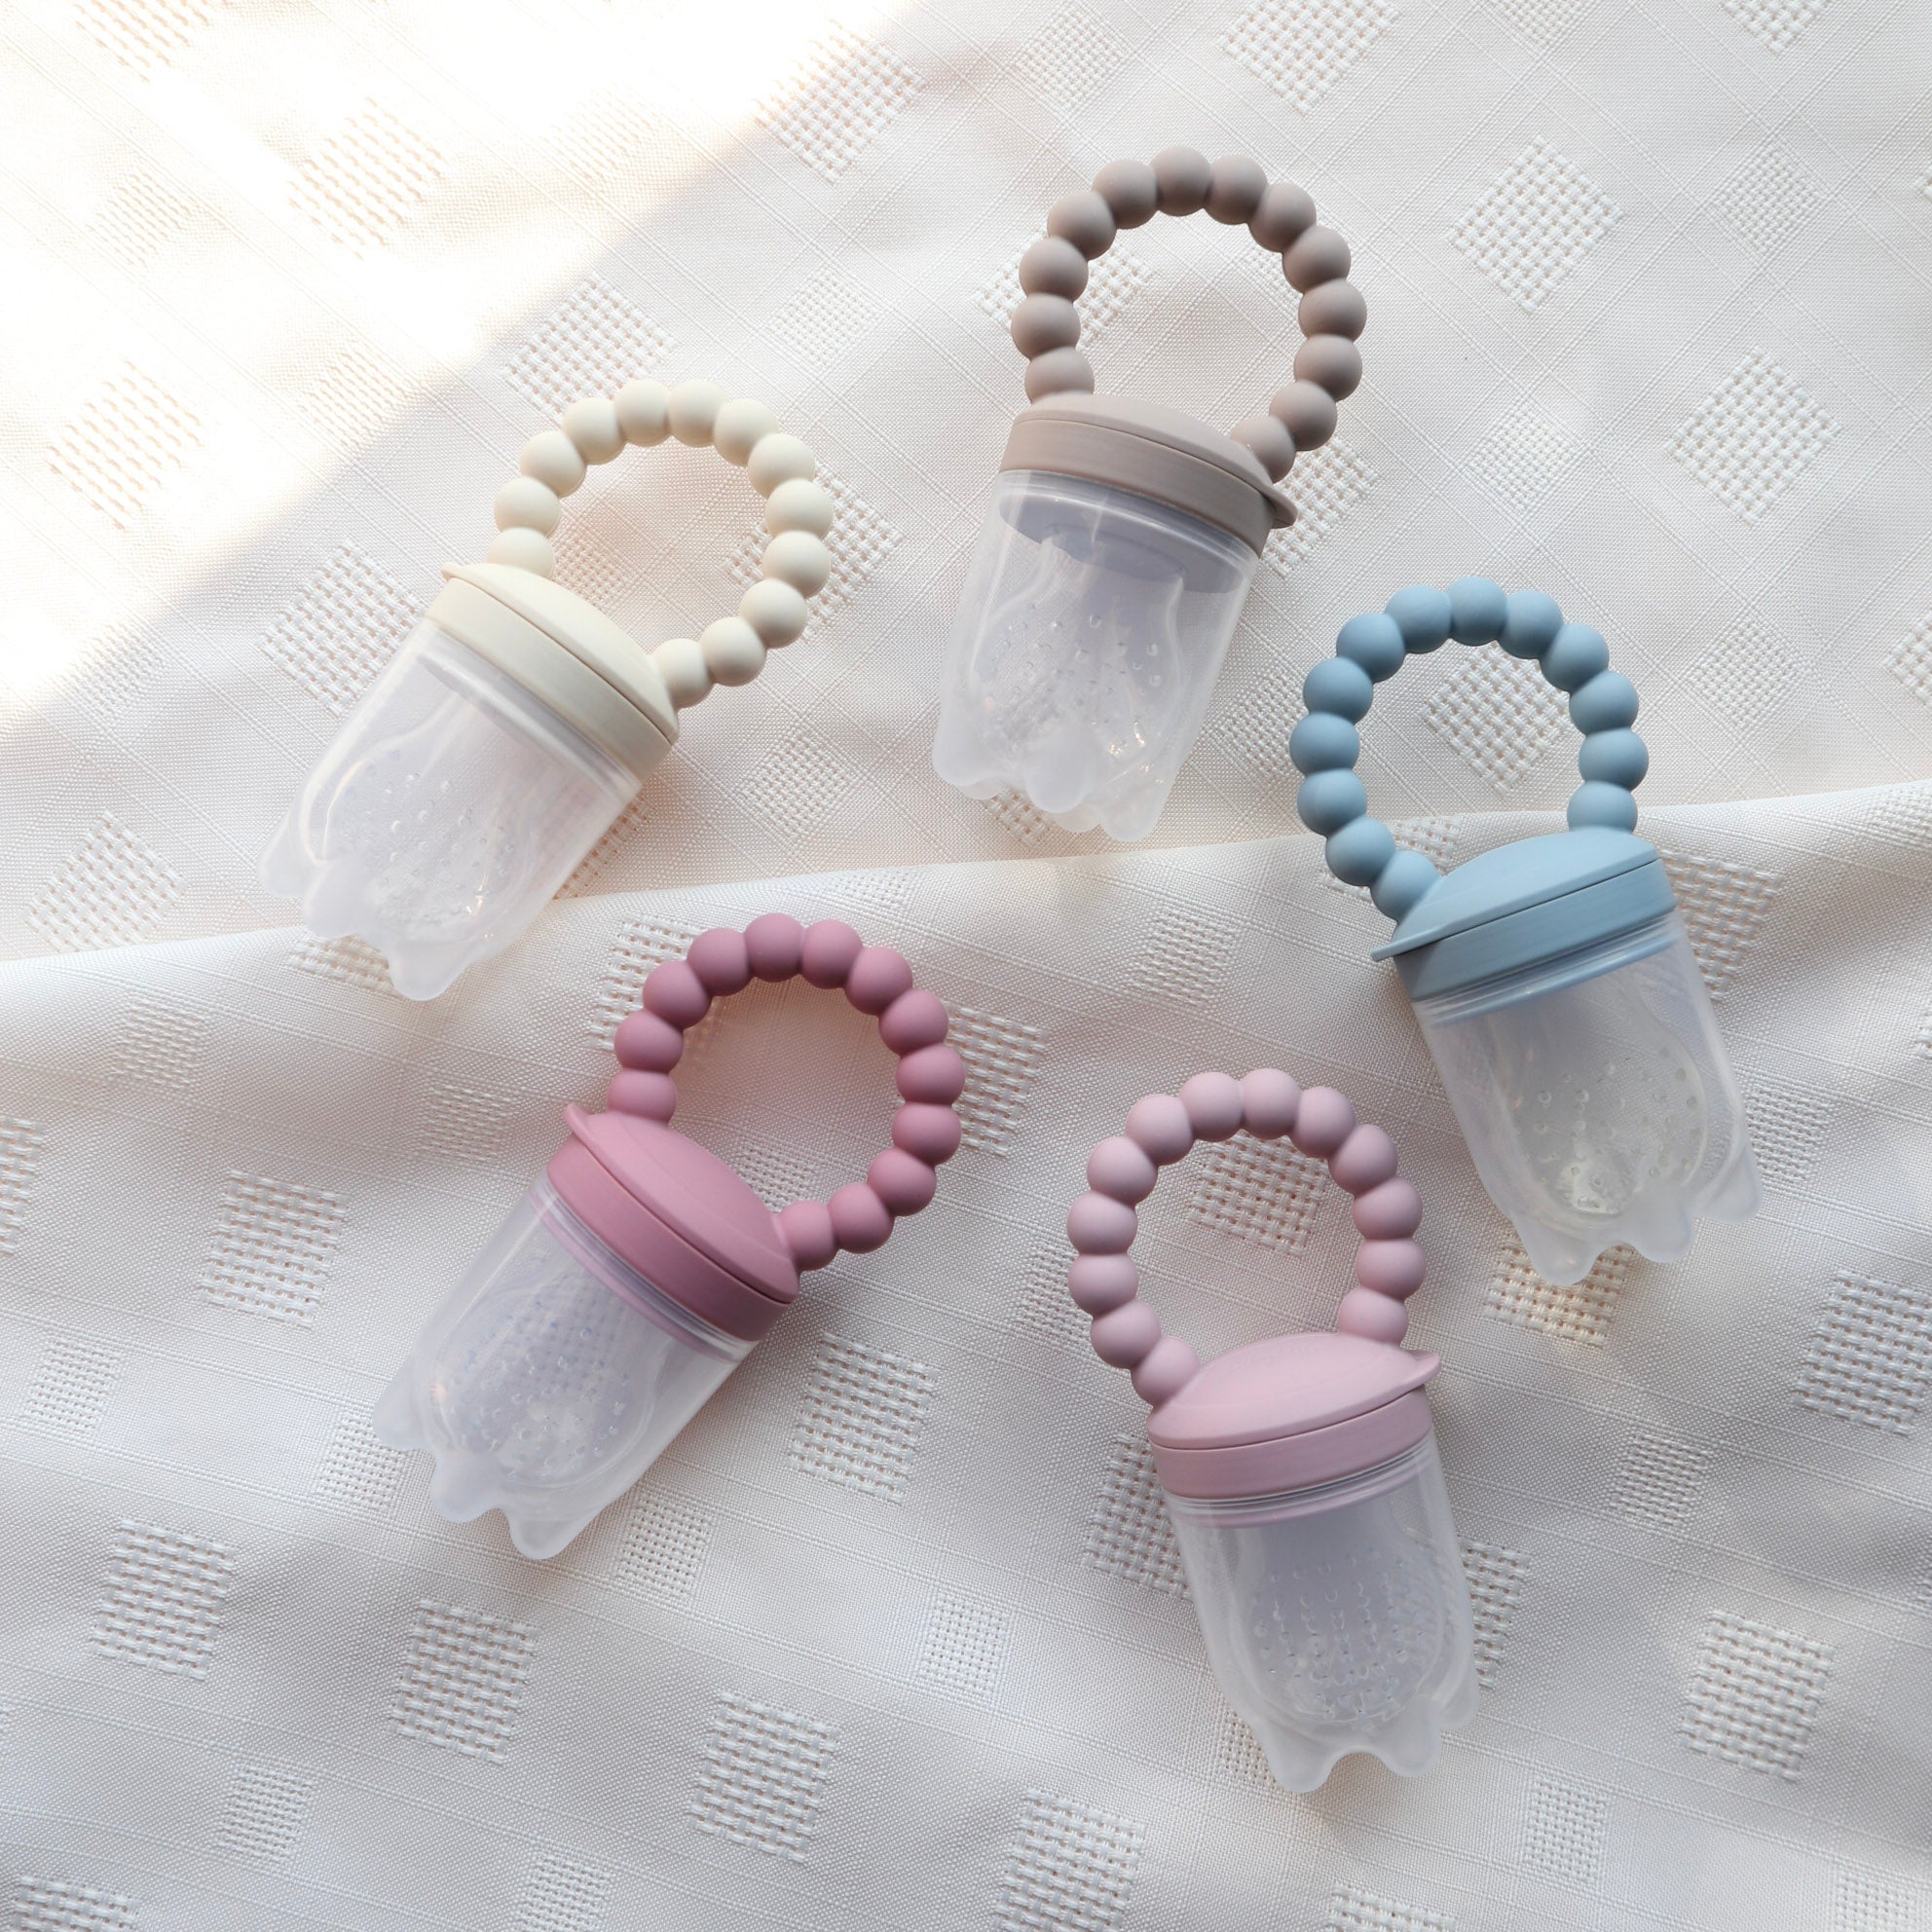 Silicone Fruit Teether for Infant #color_caramel,dusty rose, dusty teal,almond,dusty pink